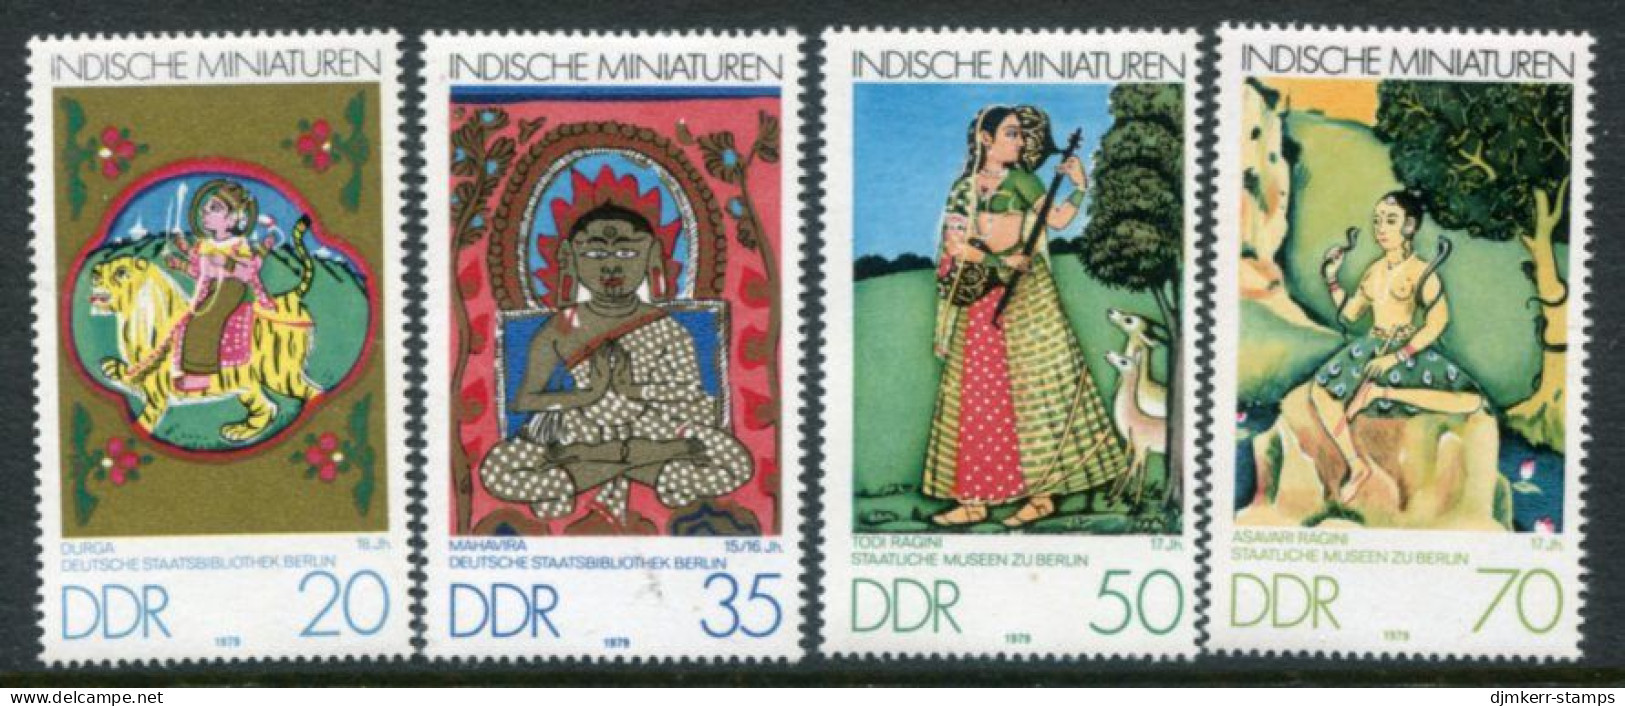 DDR / E. GERMANY 1979 Indian Miniatures MNH / **.  Michel  2418-21 - Nuovi